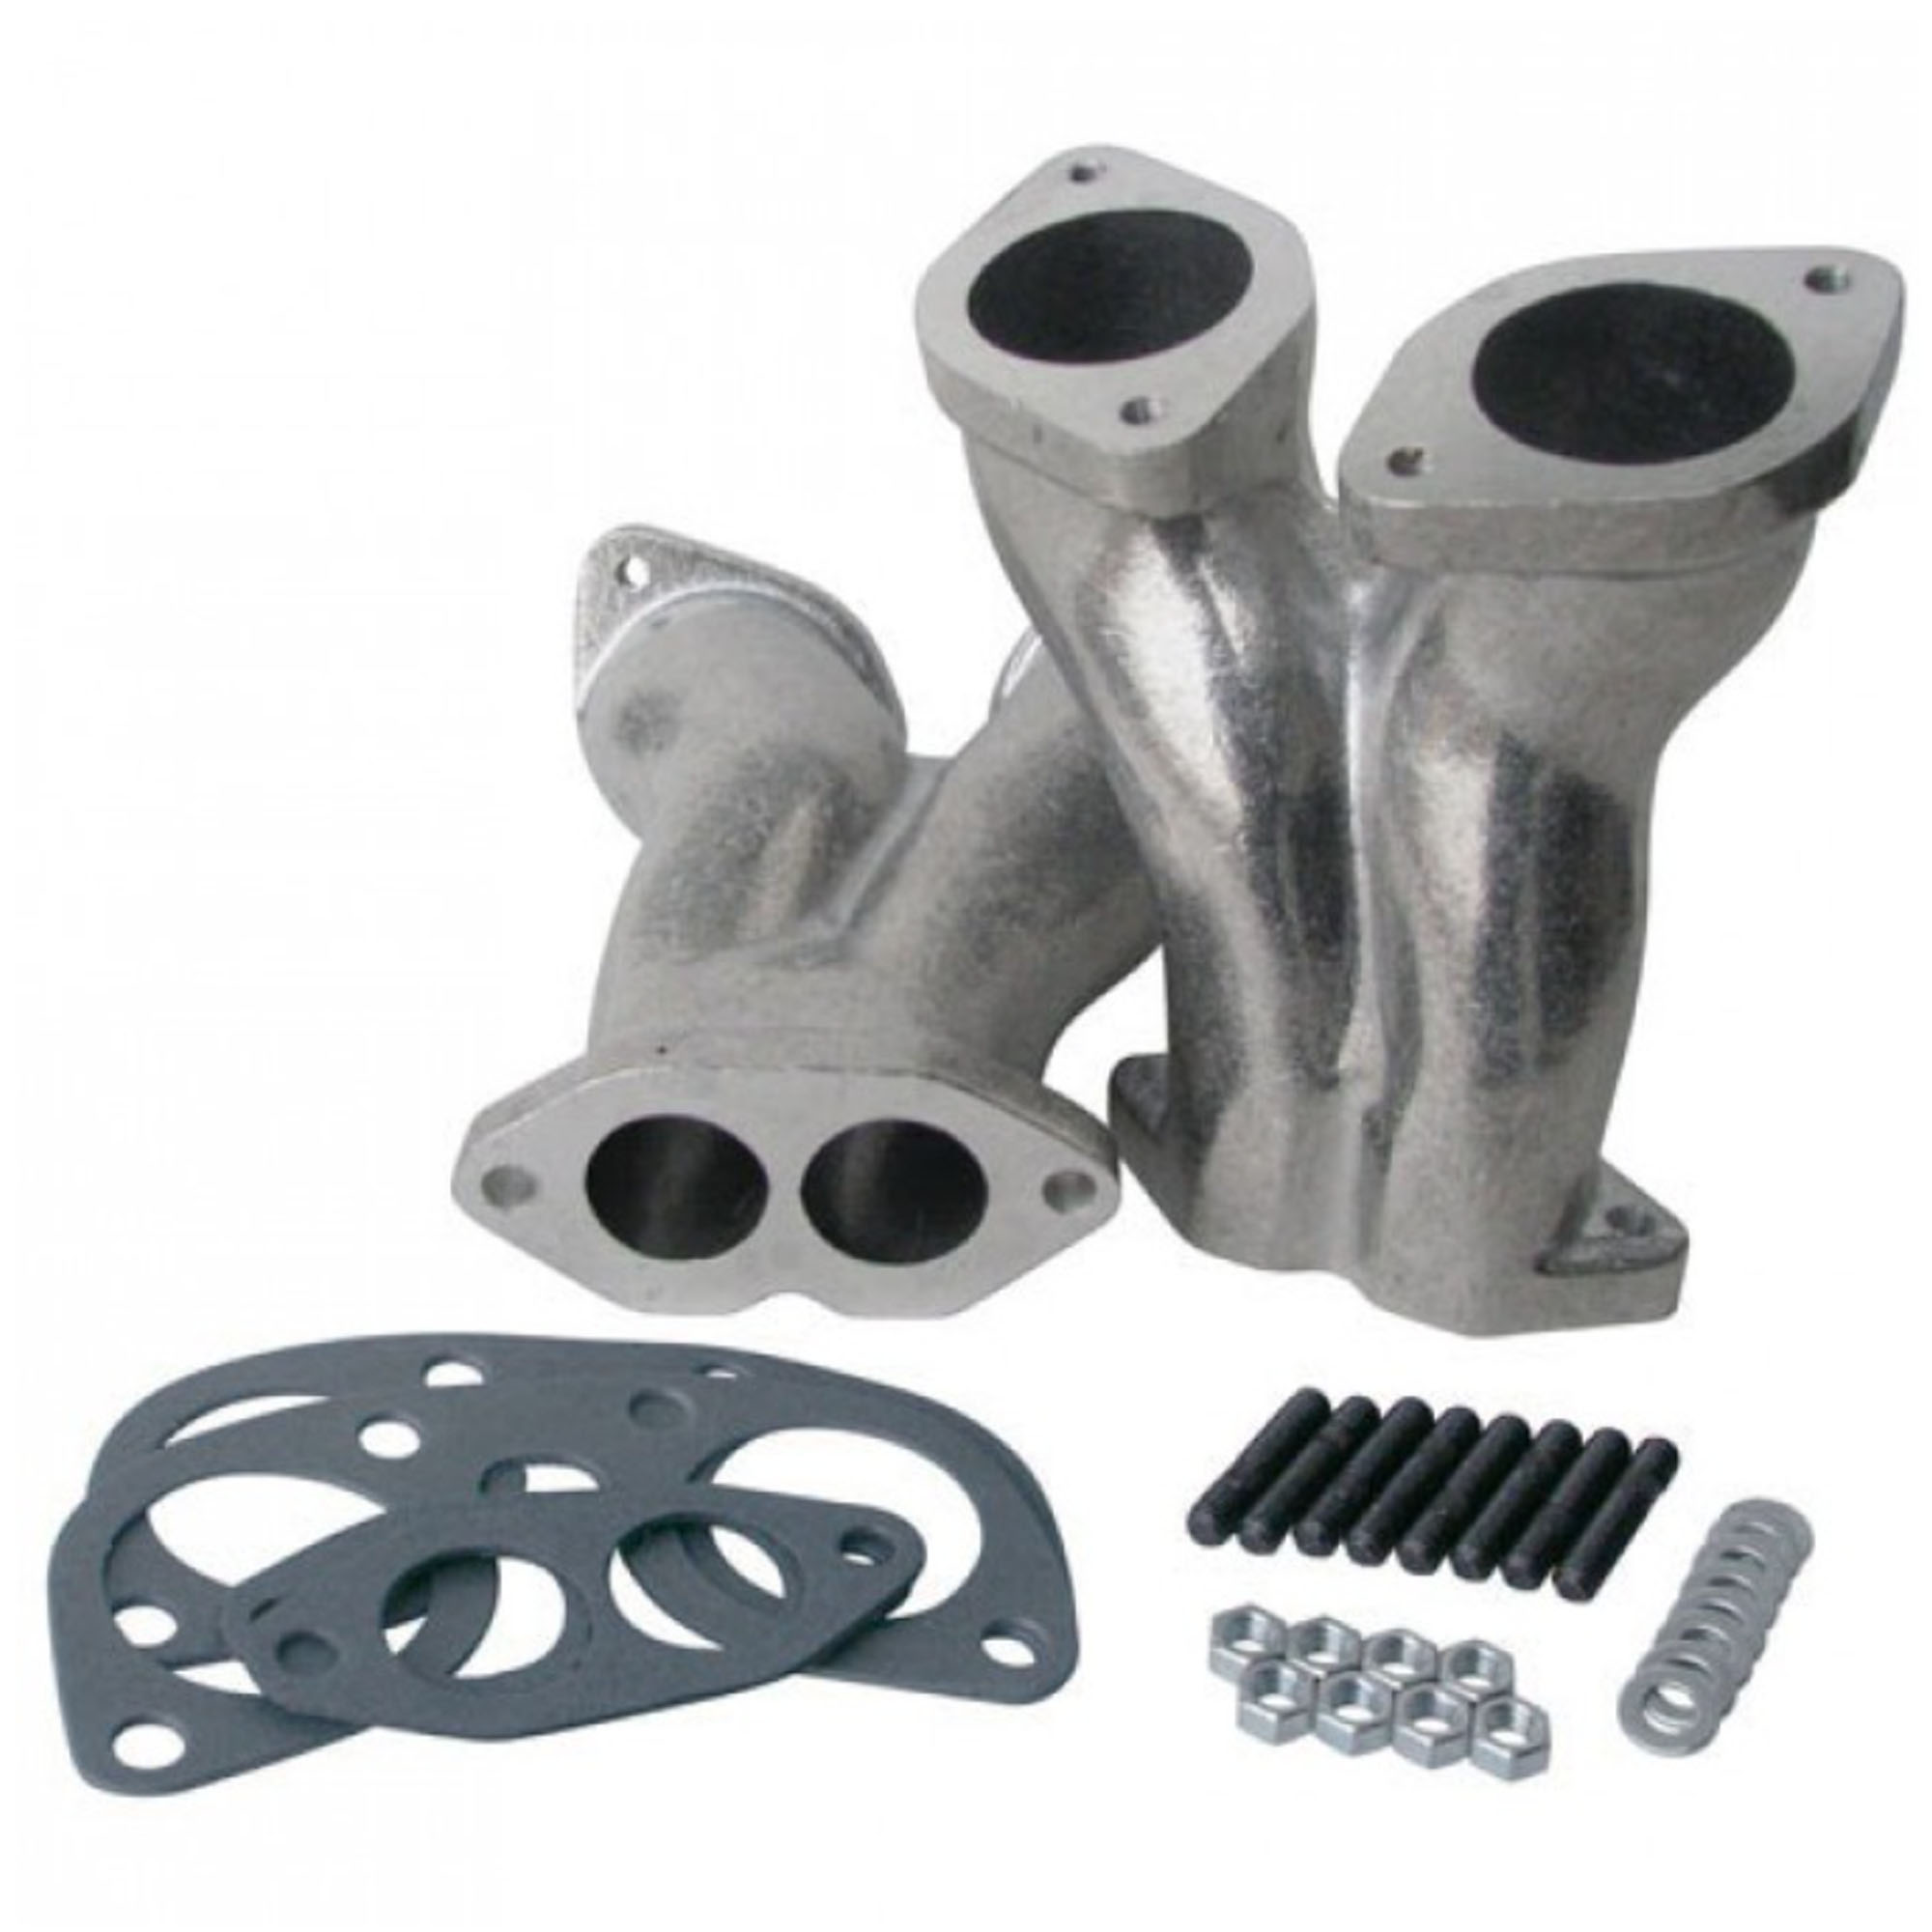 Linkage Kit W/Air Cleaners and Offset Manifold IDF Style AA Performance Products Type 1 